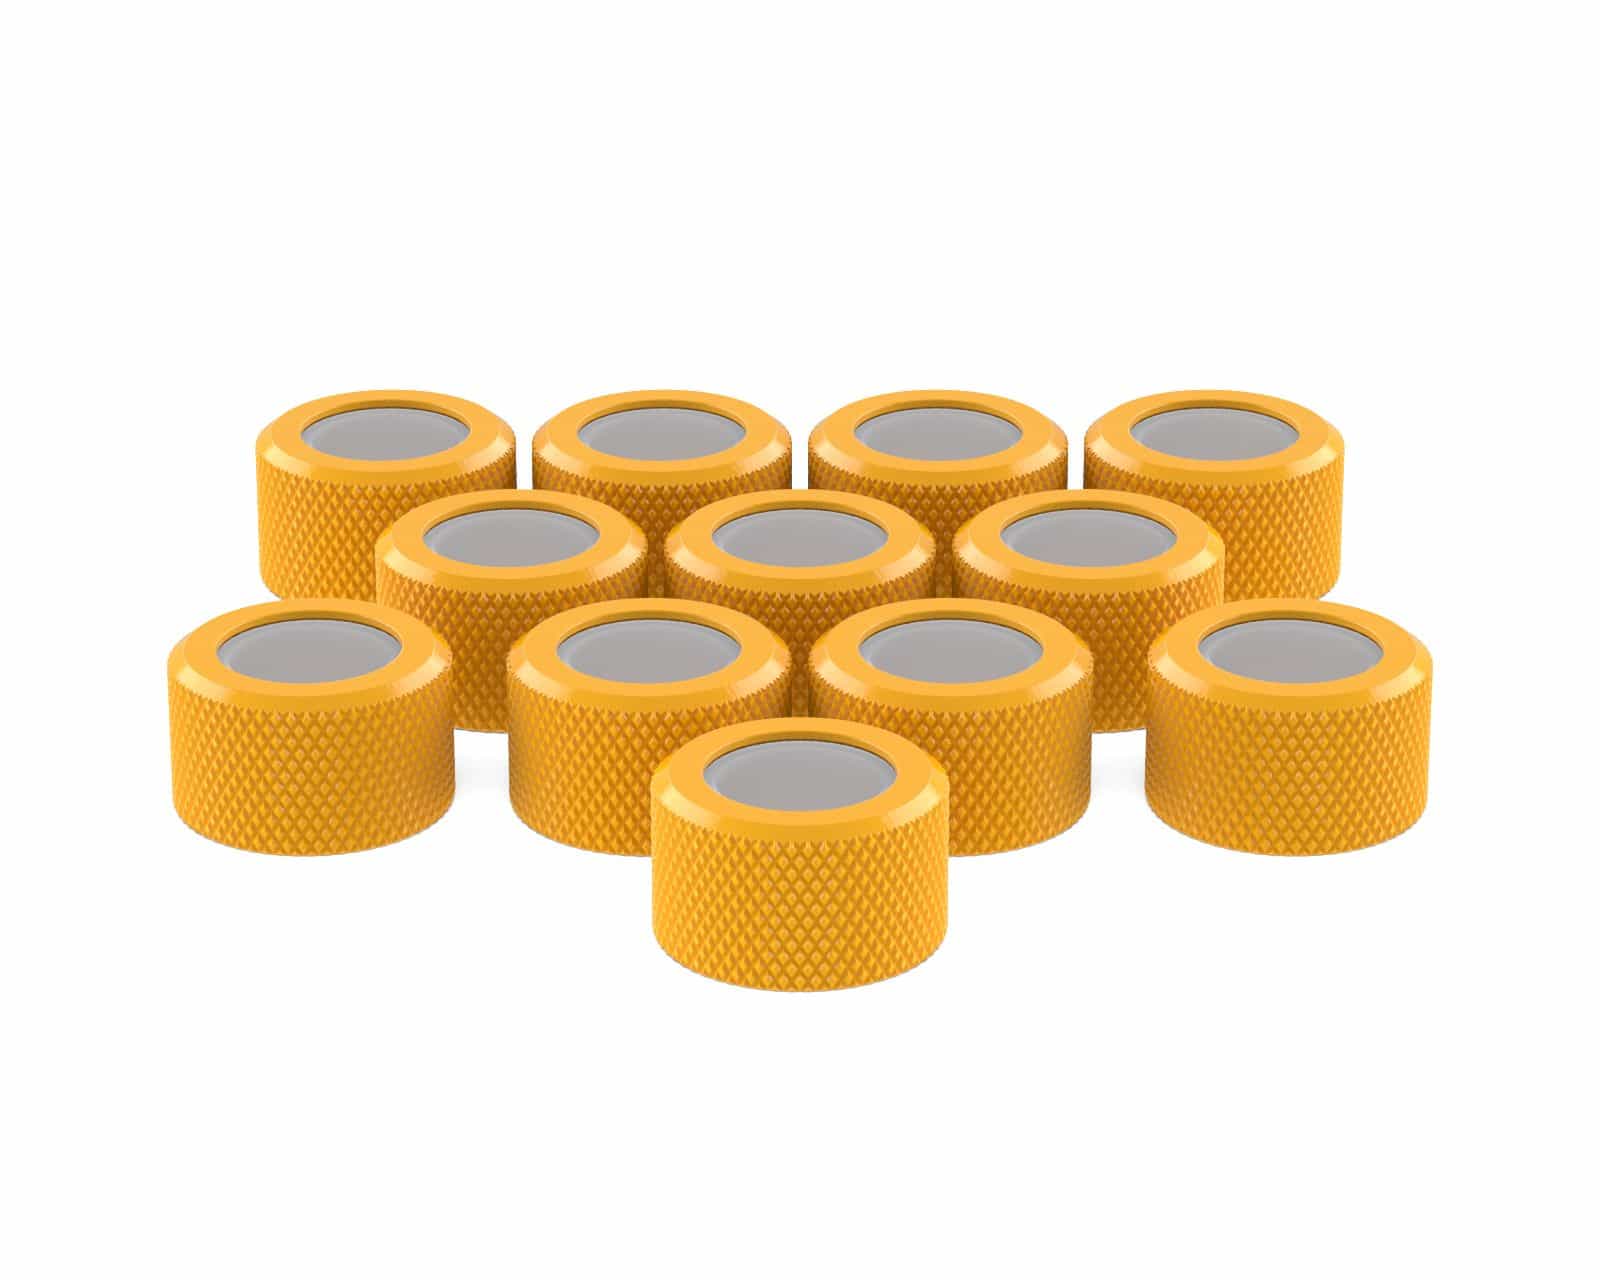 PrimoChill RMSX Replacement Cap Switch Over Kit - 16mm - PrimoChill - KEEPING IT COOL Yellow